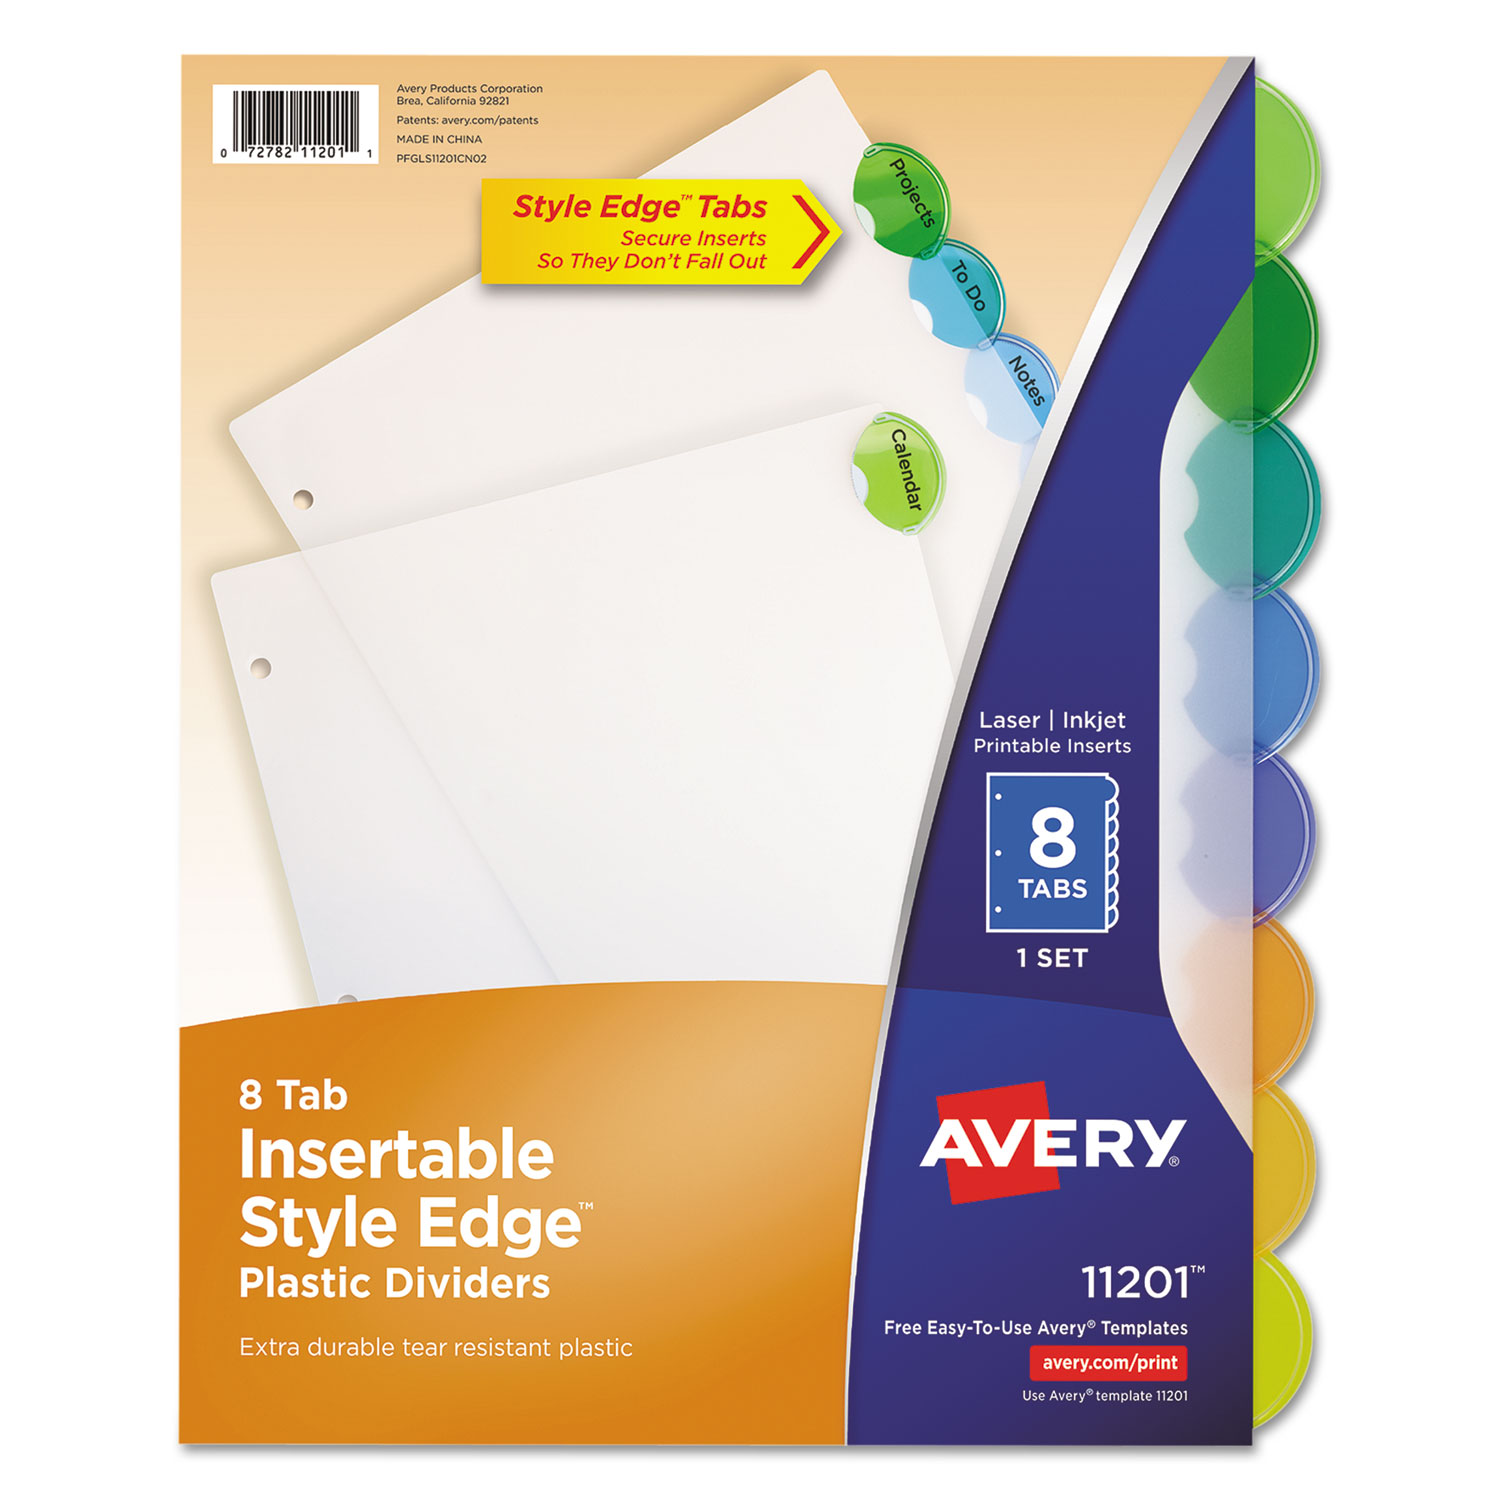 Avery Dennison Ave-11907 Plastic Two-pocket Insertable Tab Dividers for sale online 